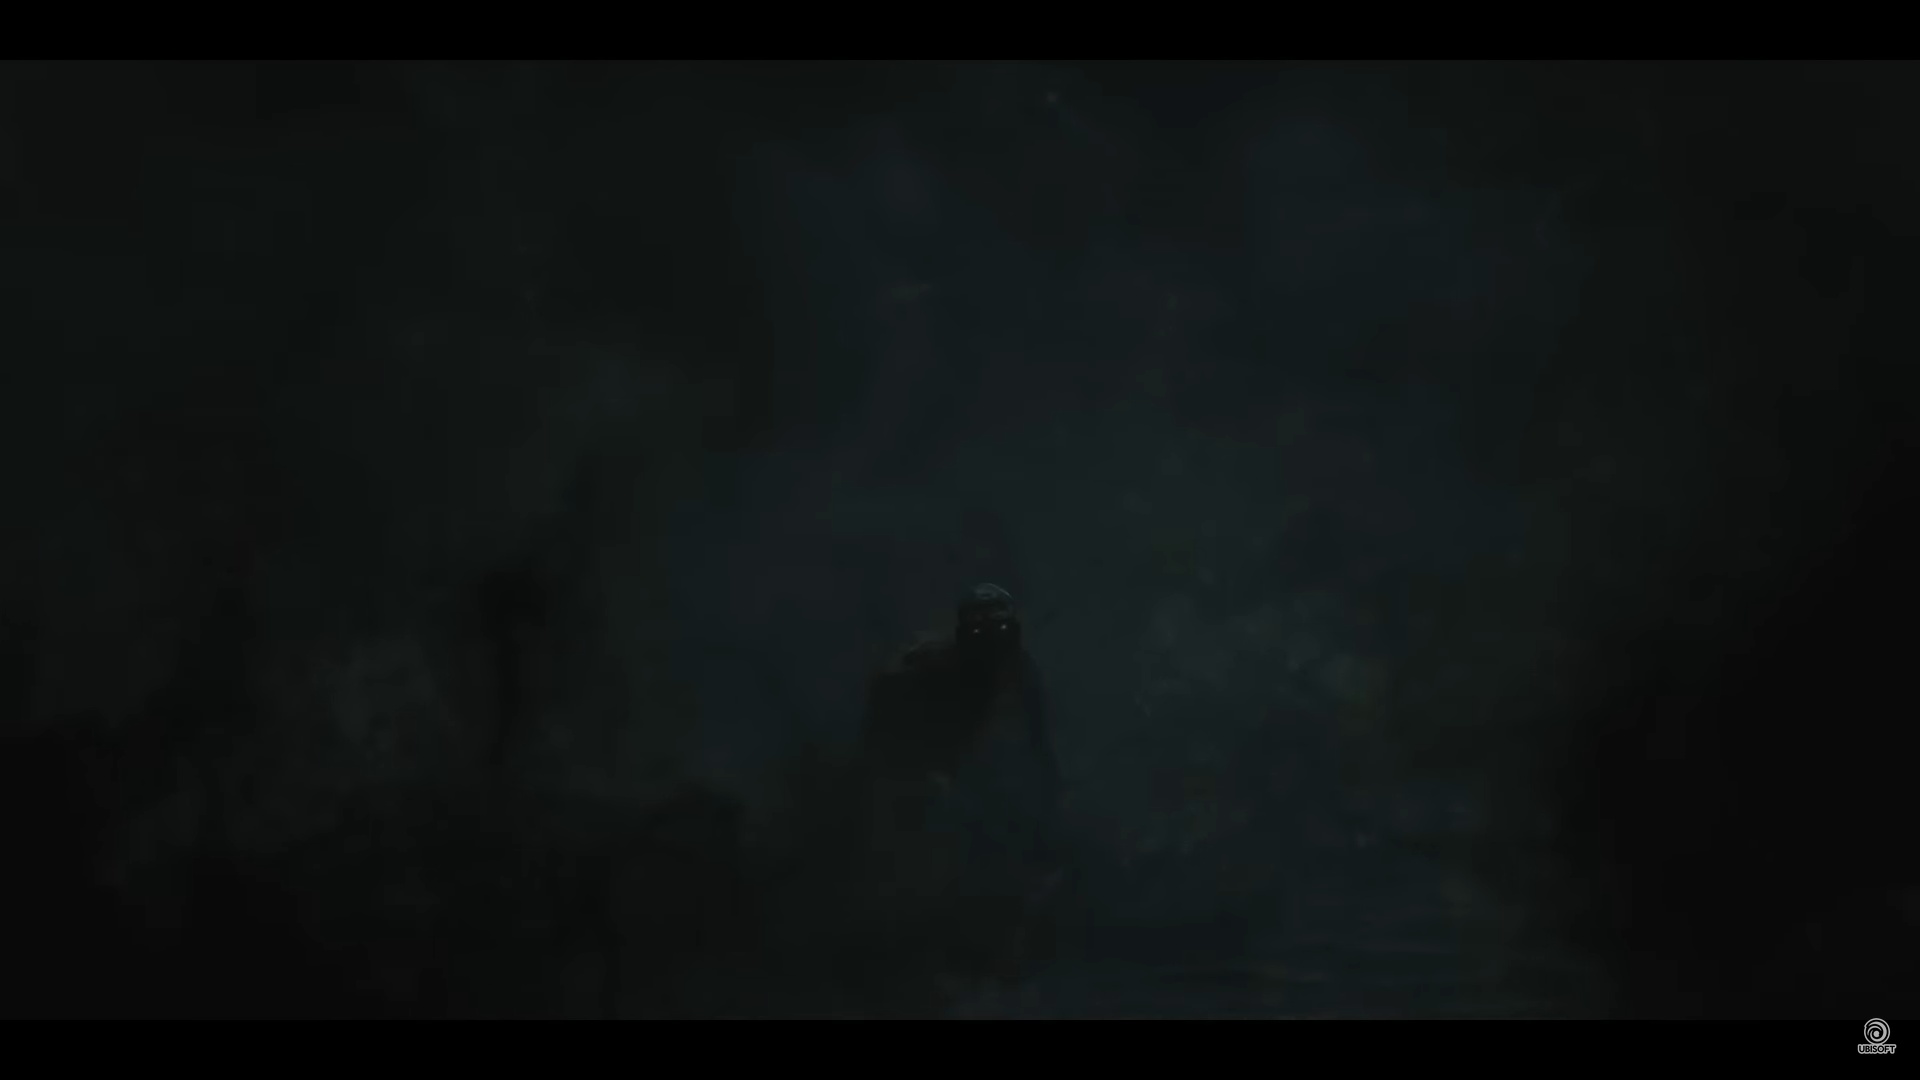 (In an assassination sequence typical of Assassin's Creed, a dark shadowy being appears to Basim in the trailer for Mirage. That this is Loki is at least not unlikely.)